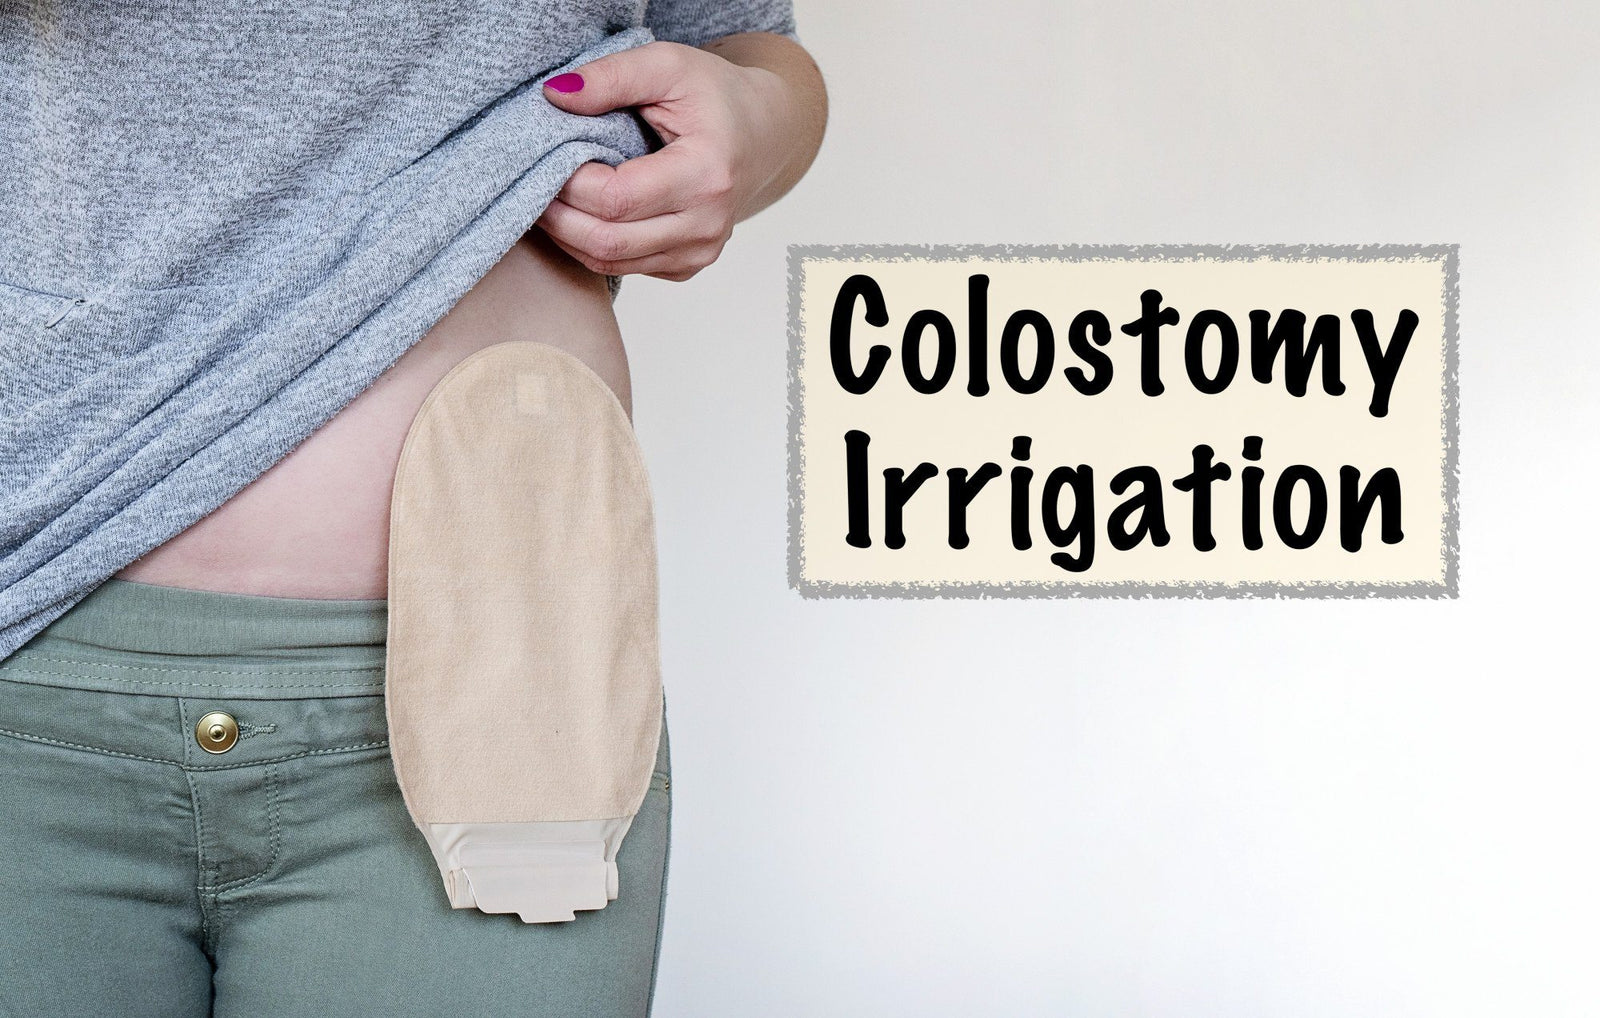 How to Change a Colostomy Bag Step-By-Step – Because Market